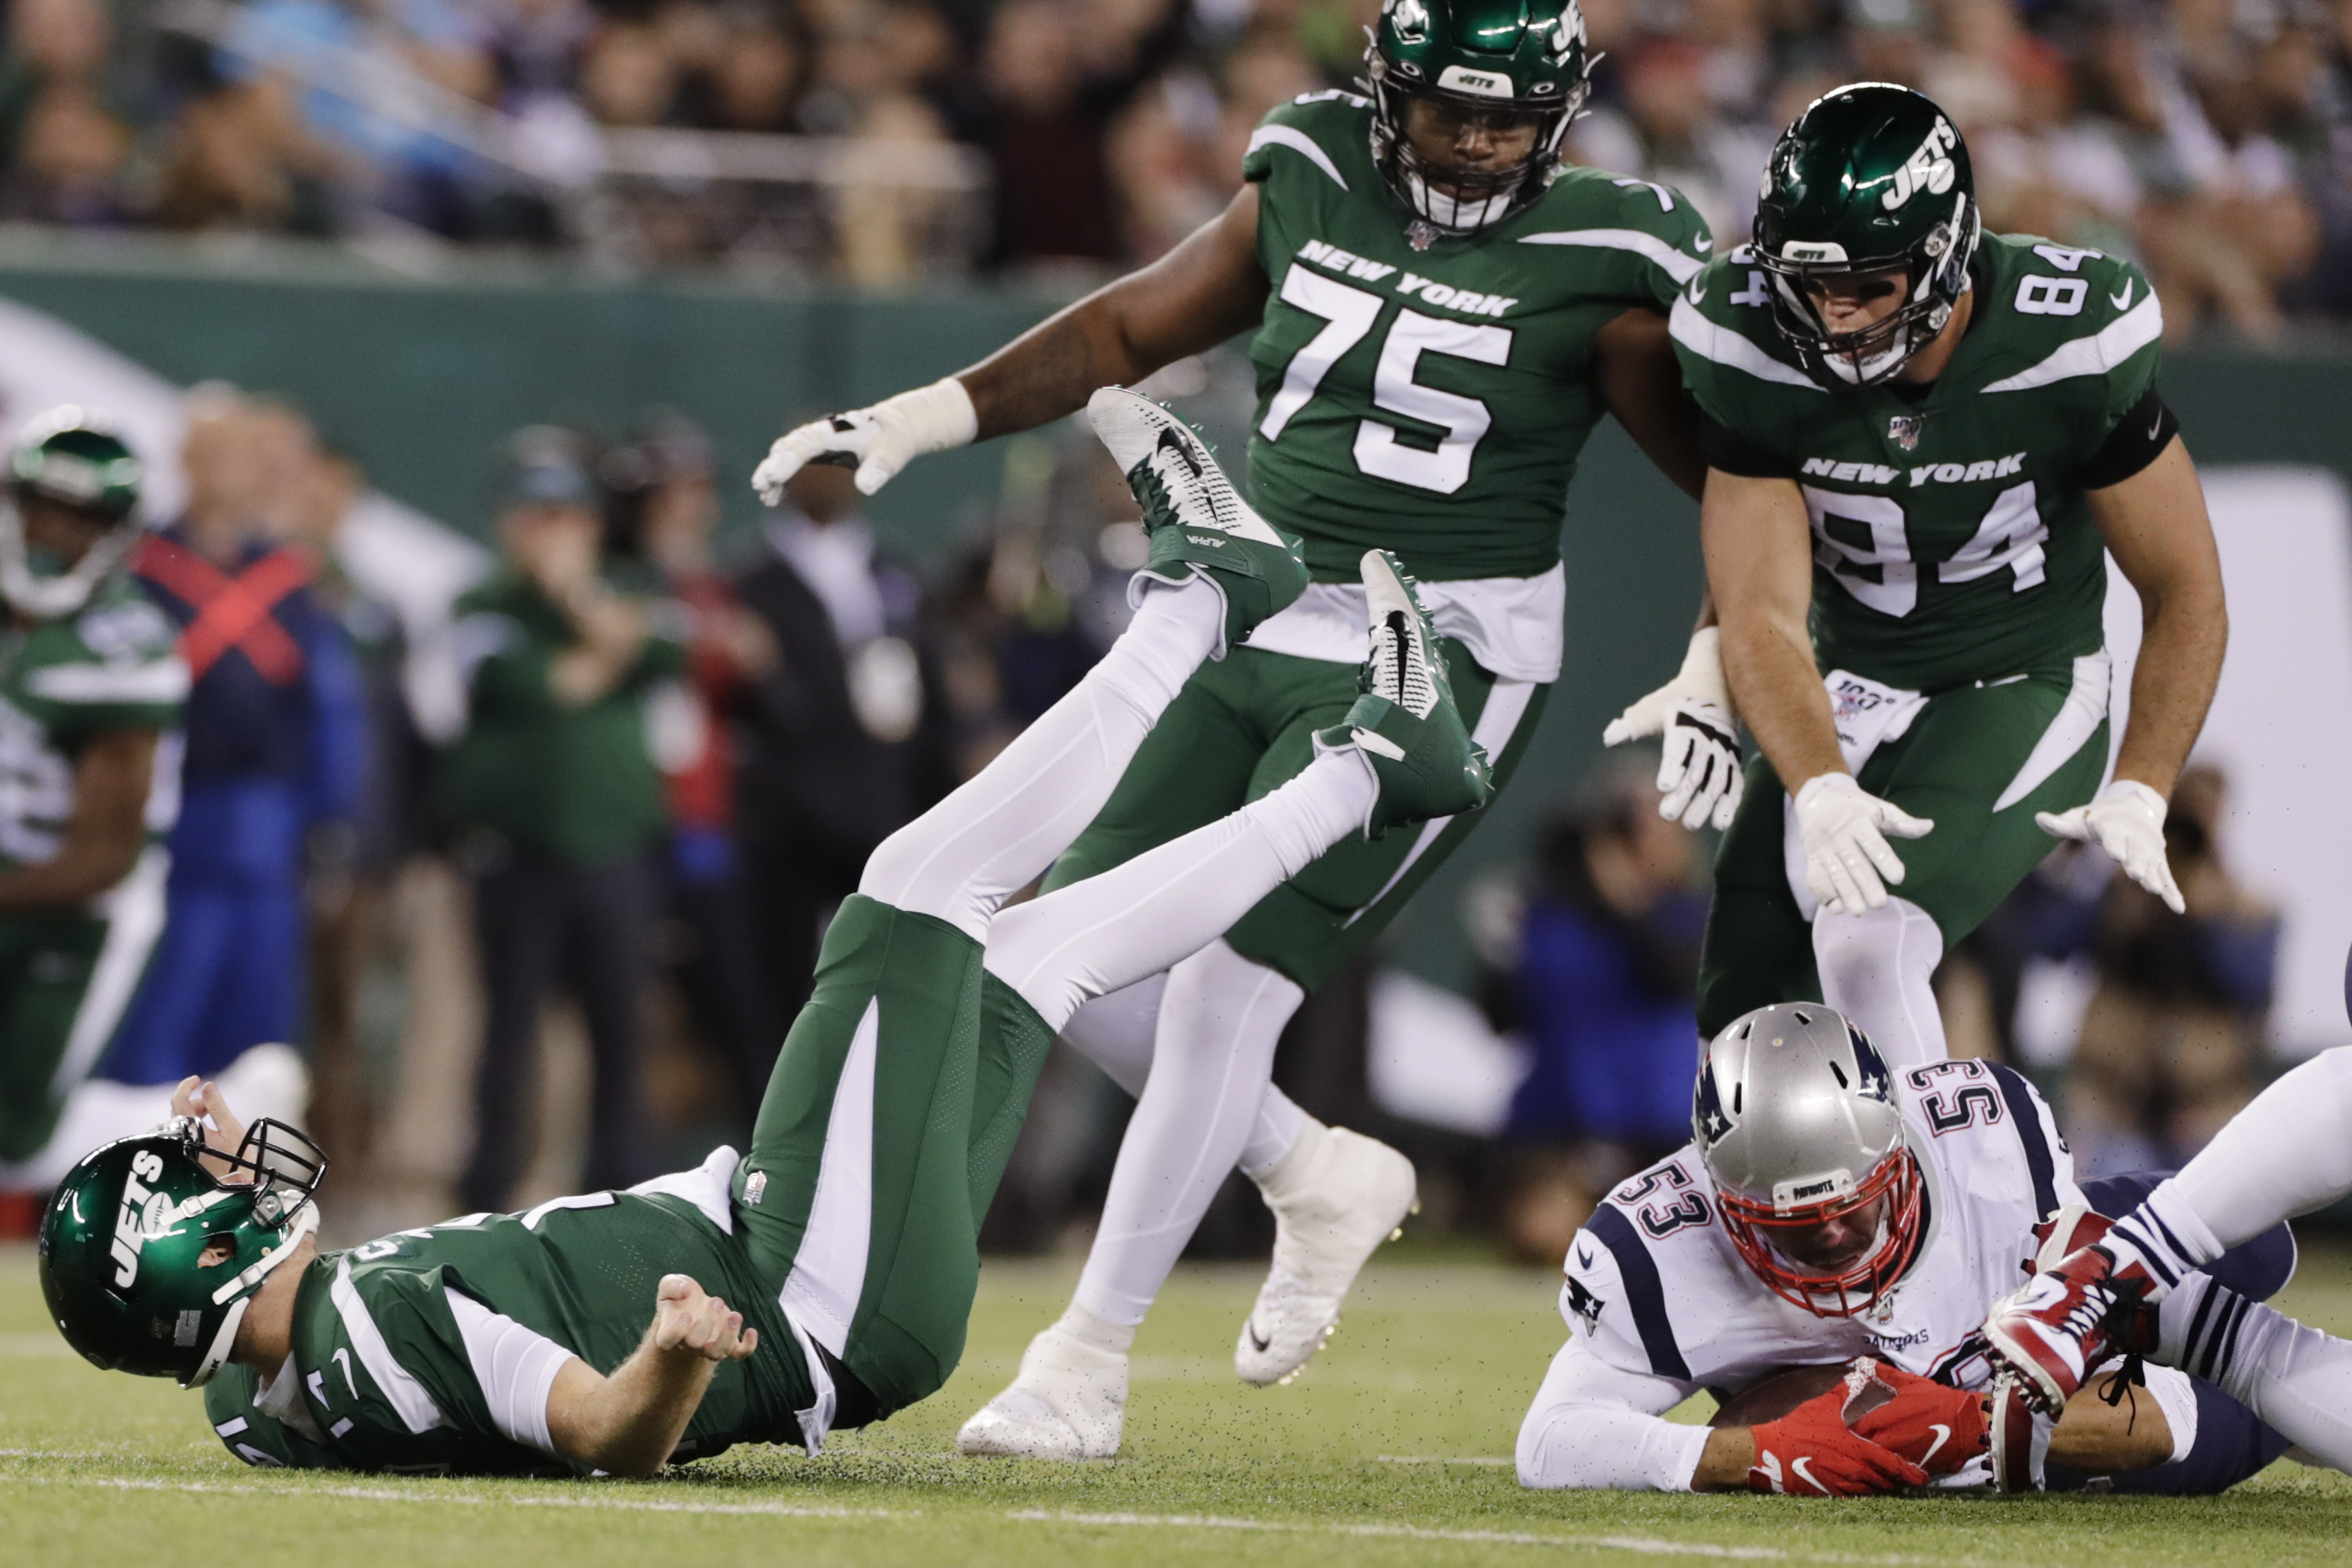 Jets hope to learn, improve from brutal loss to Patriots